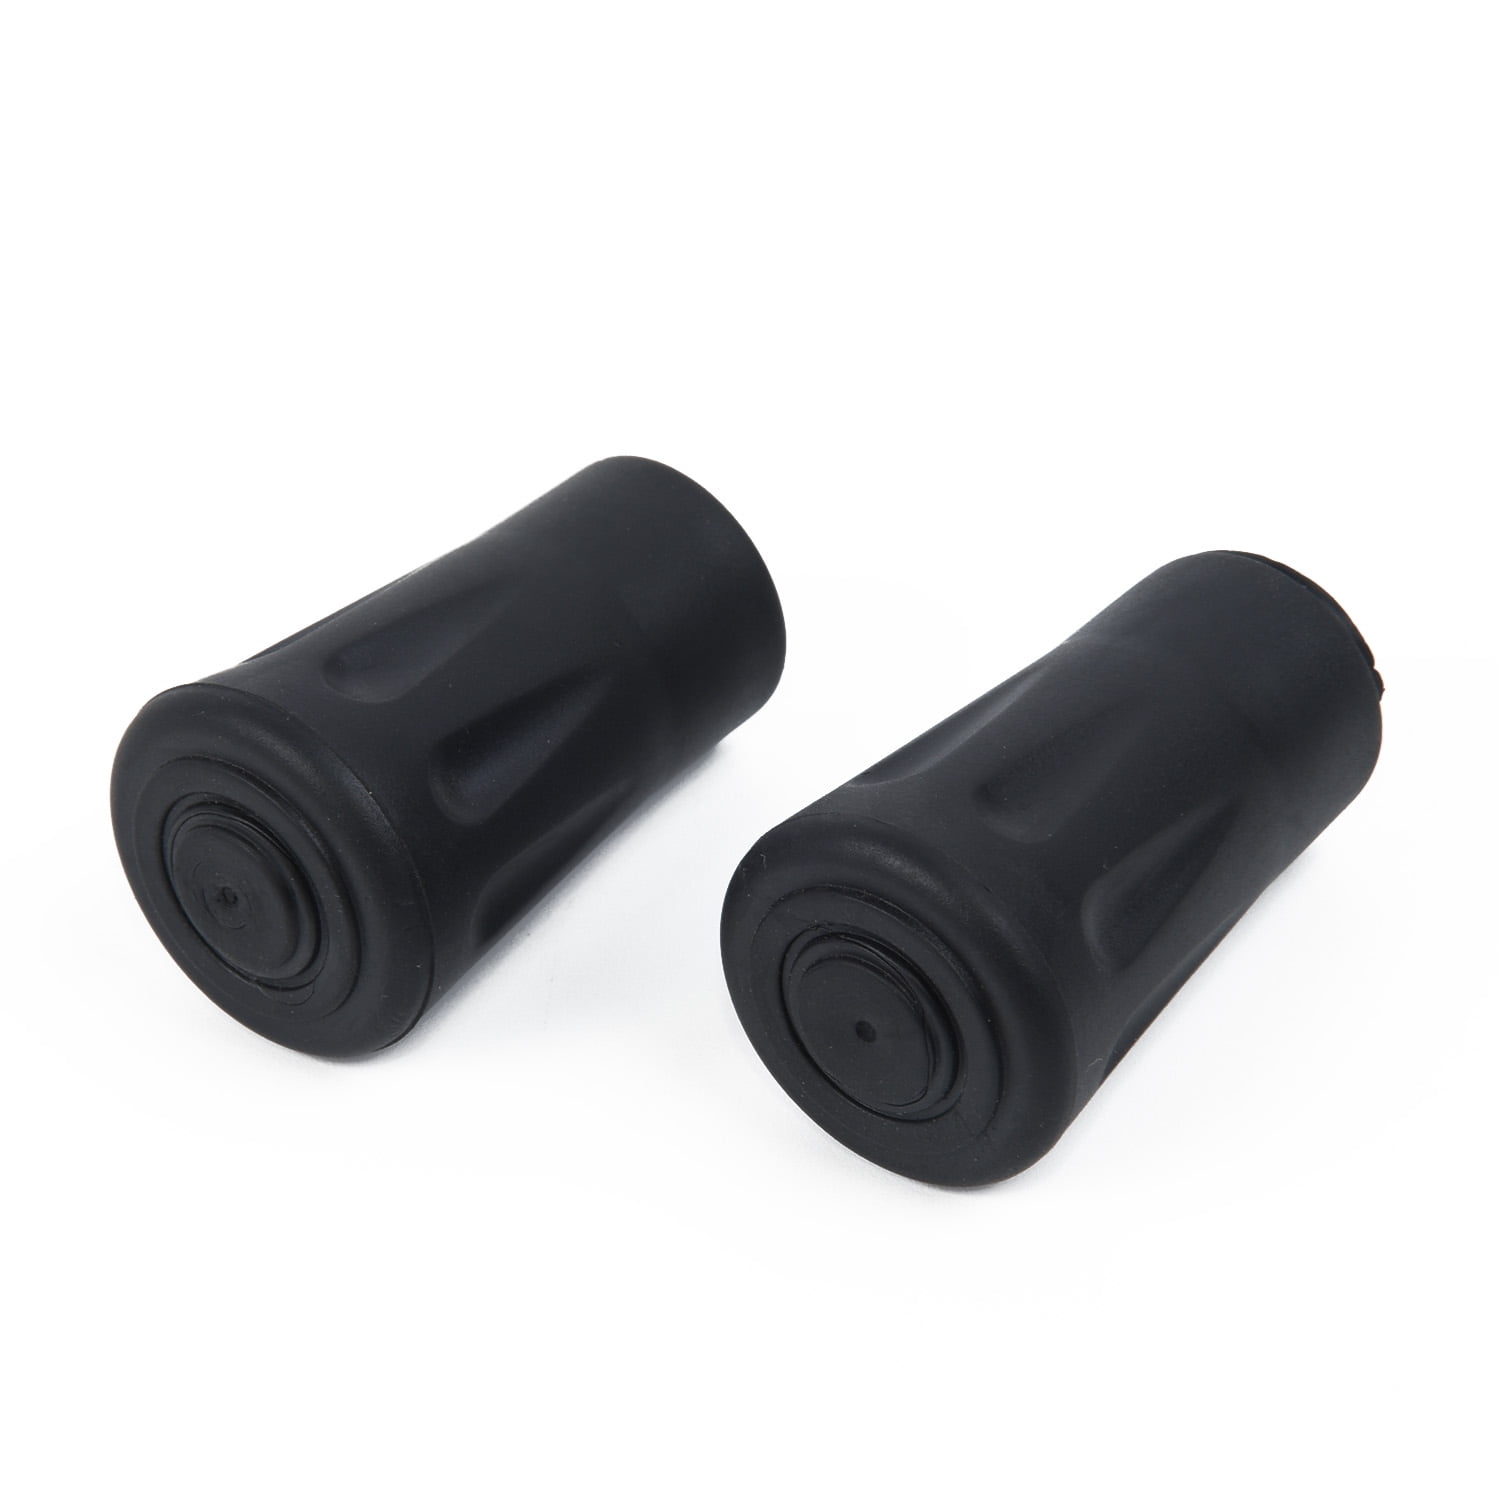 2/4xRubber Trekking Pole Covers Reinforced Tip End Cap For Hiking Walking Sticks 